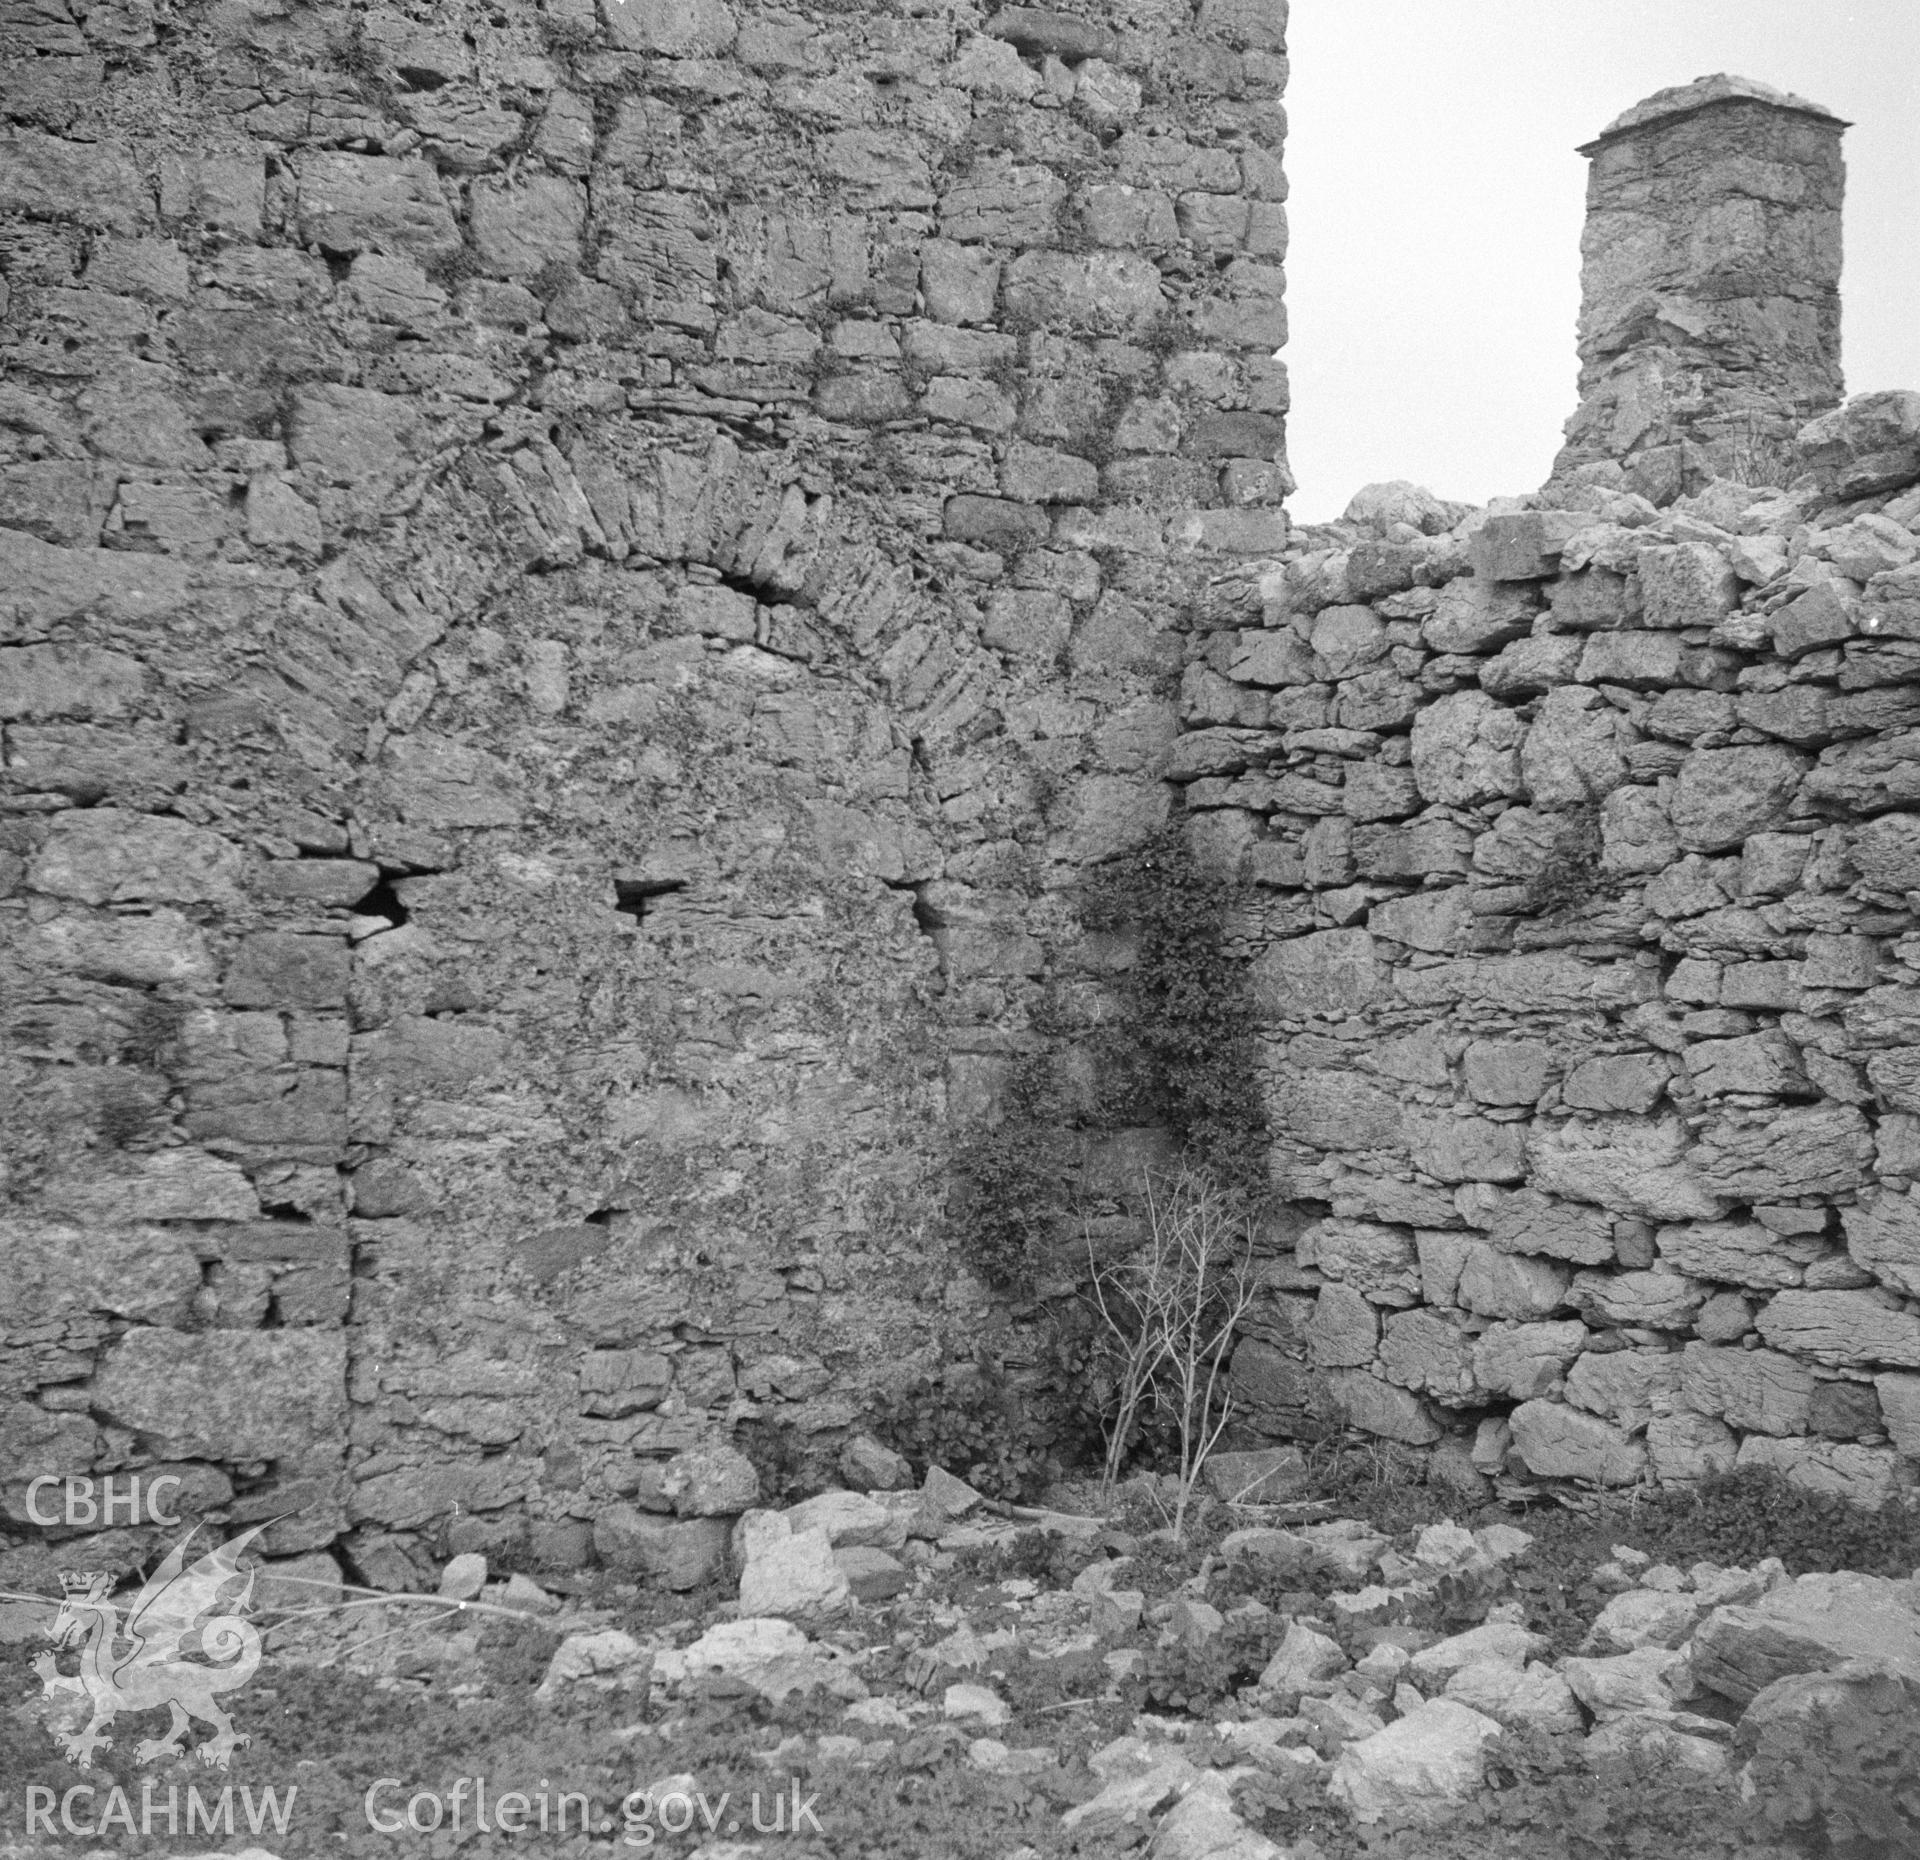 Digital copy of a black and white negative showing the Church Tower on Puffin Island.